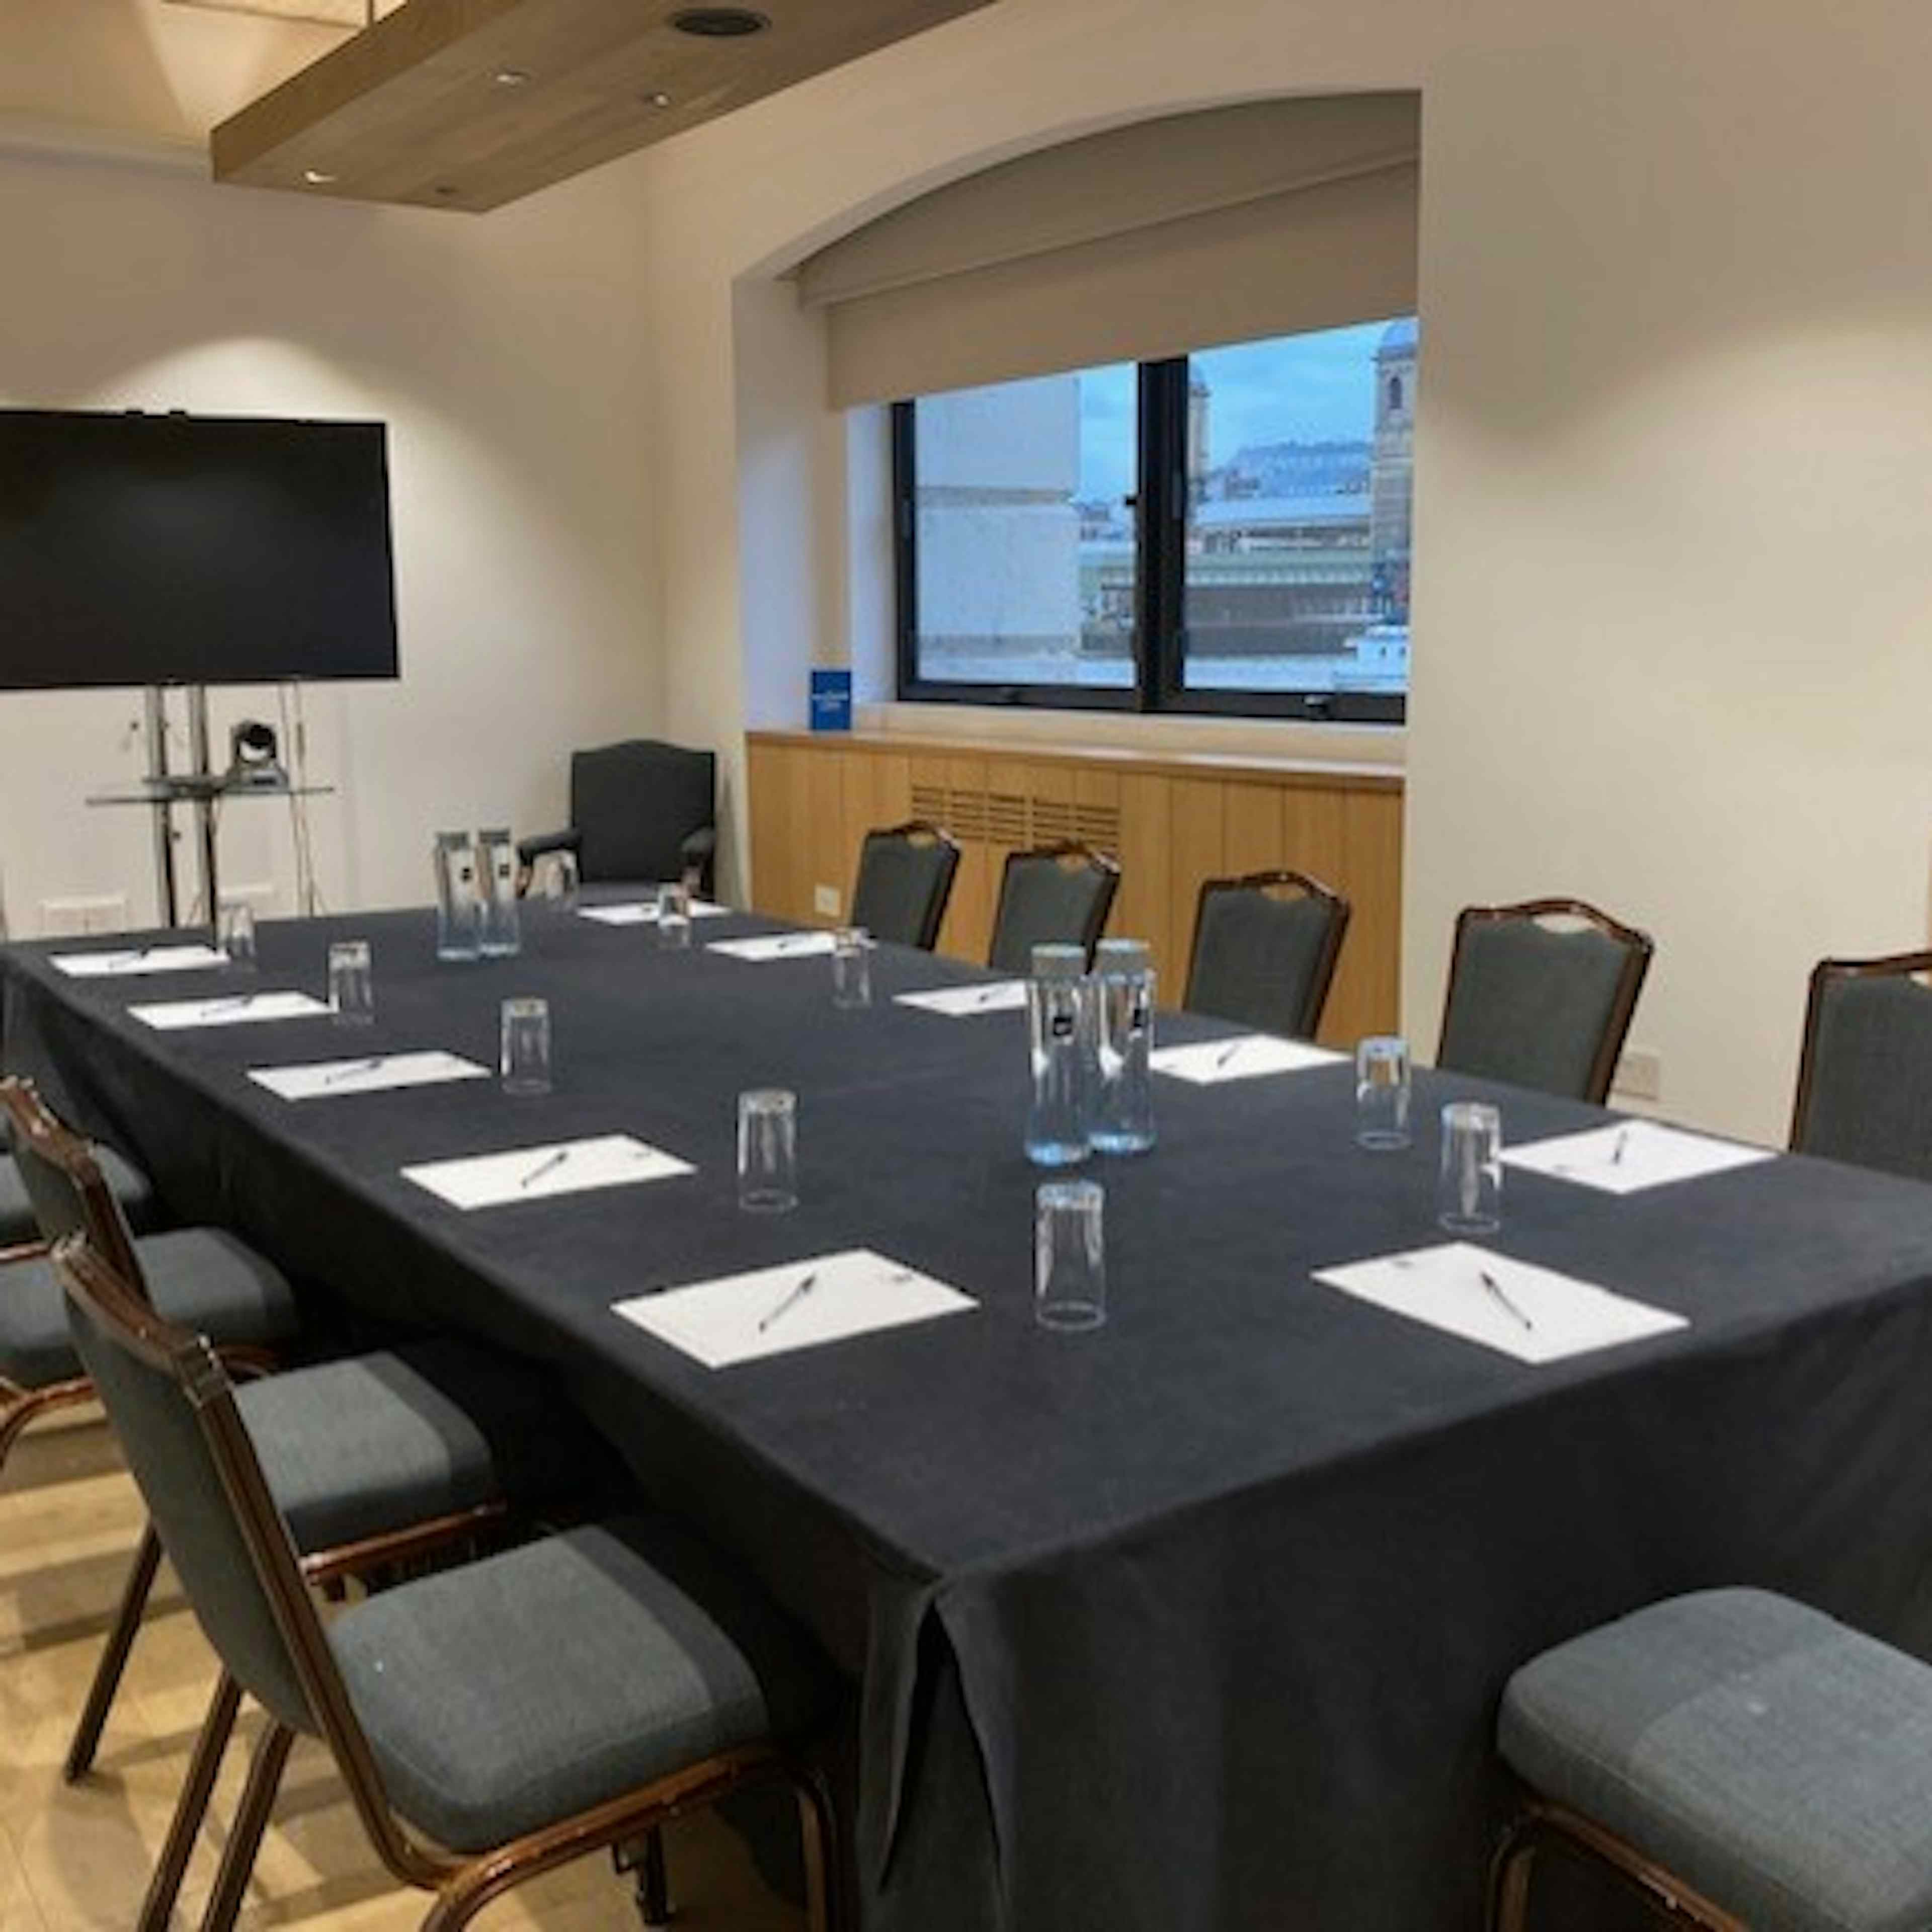 Glaziers Hall - The Thames Room image 1